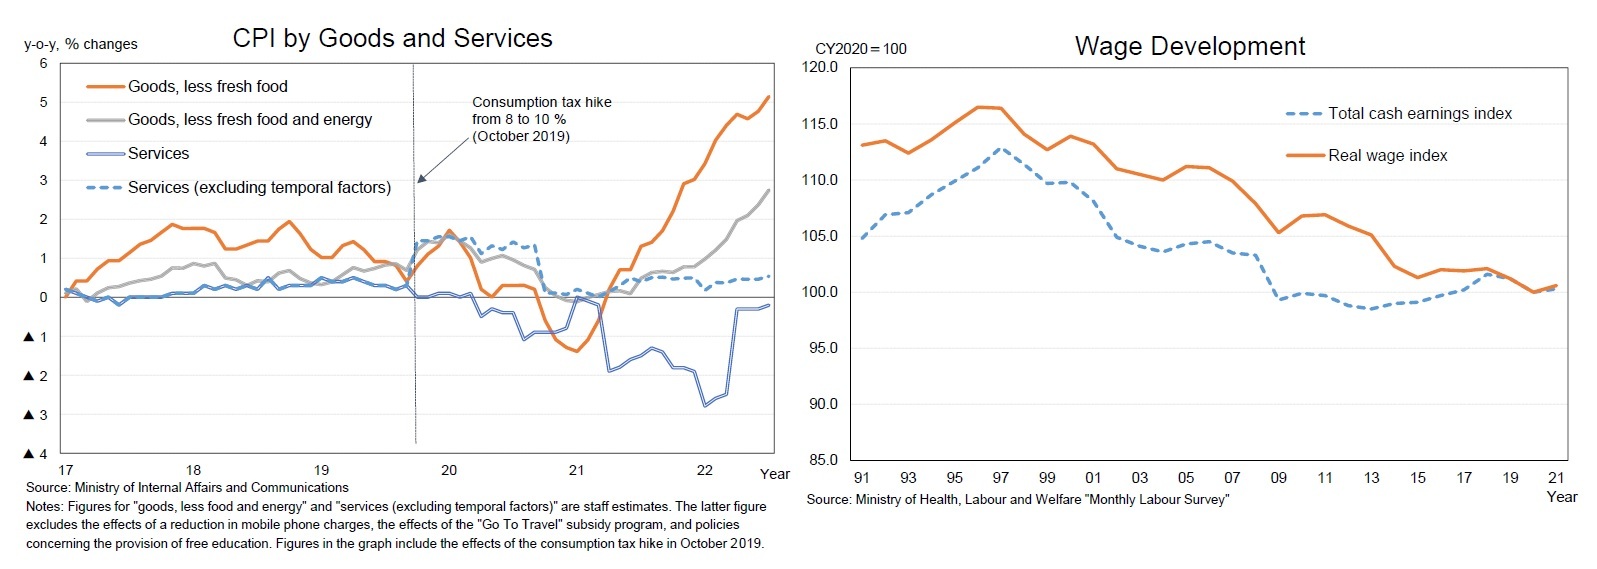 CPI by Goods and Services/Wage Development